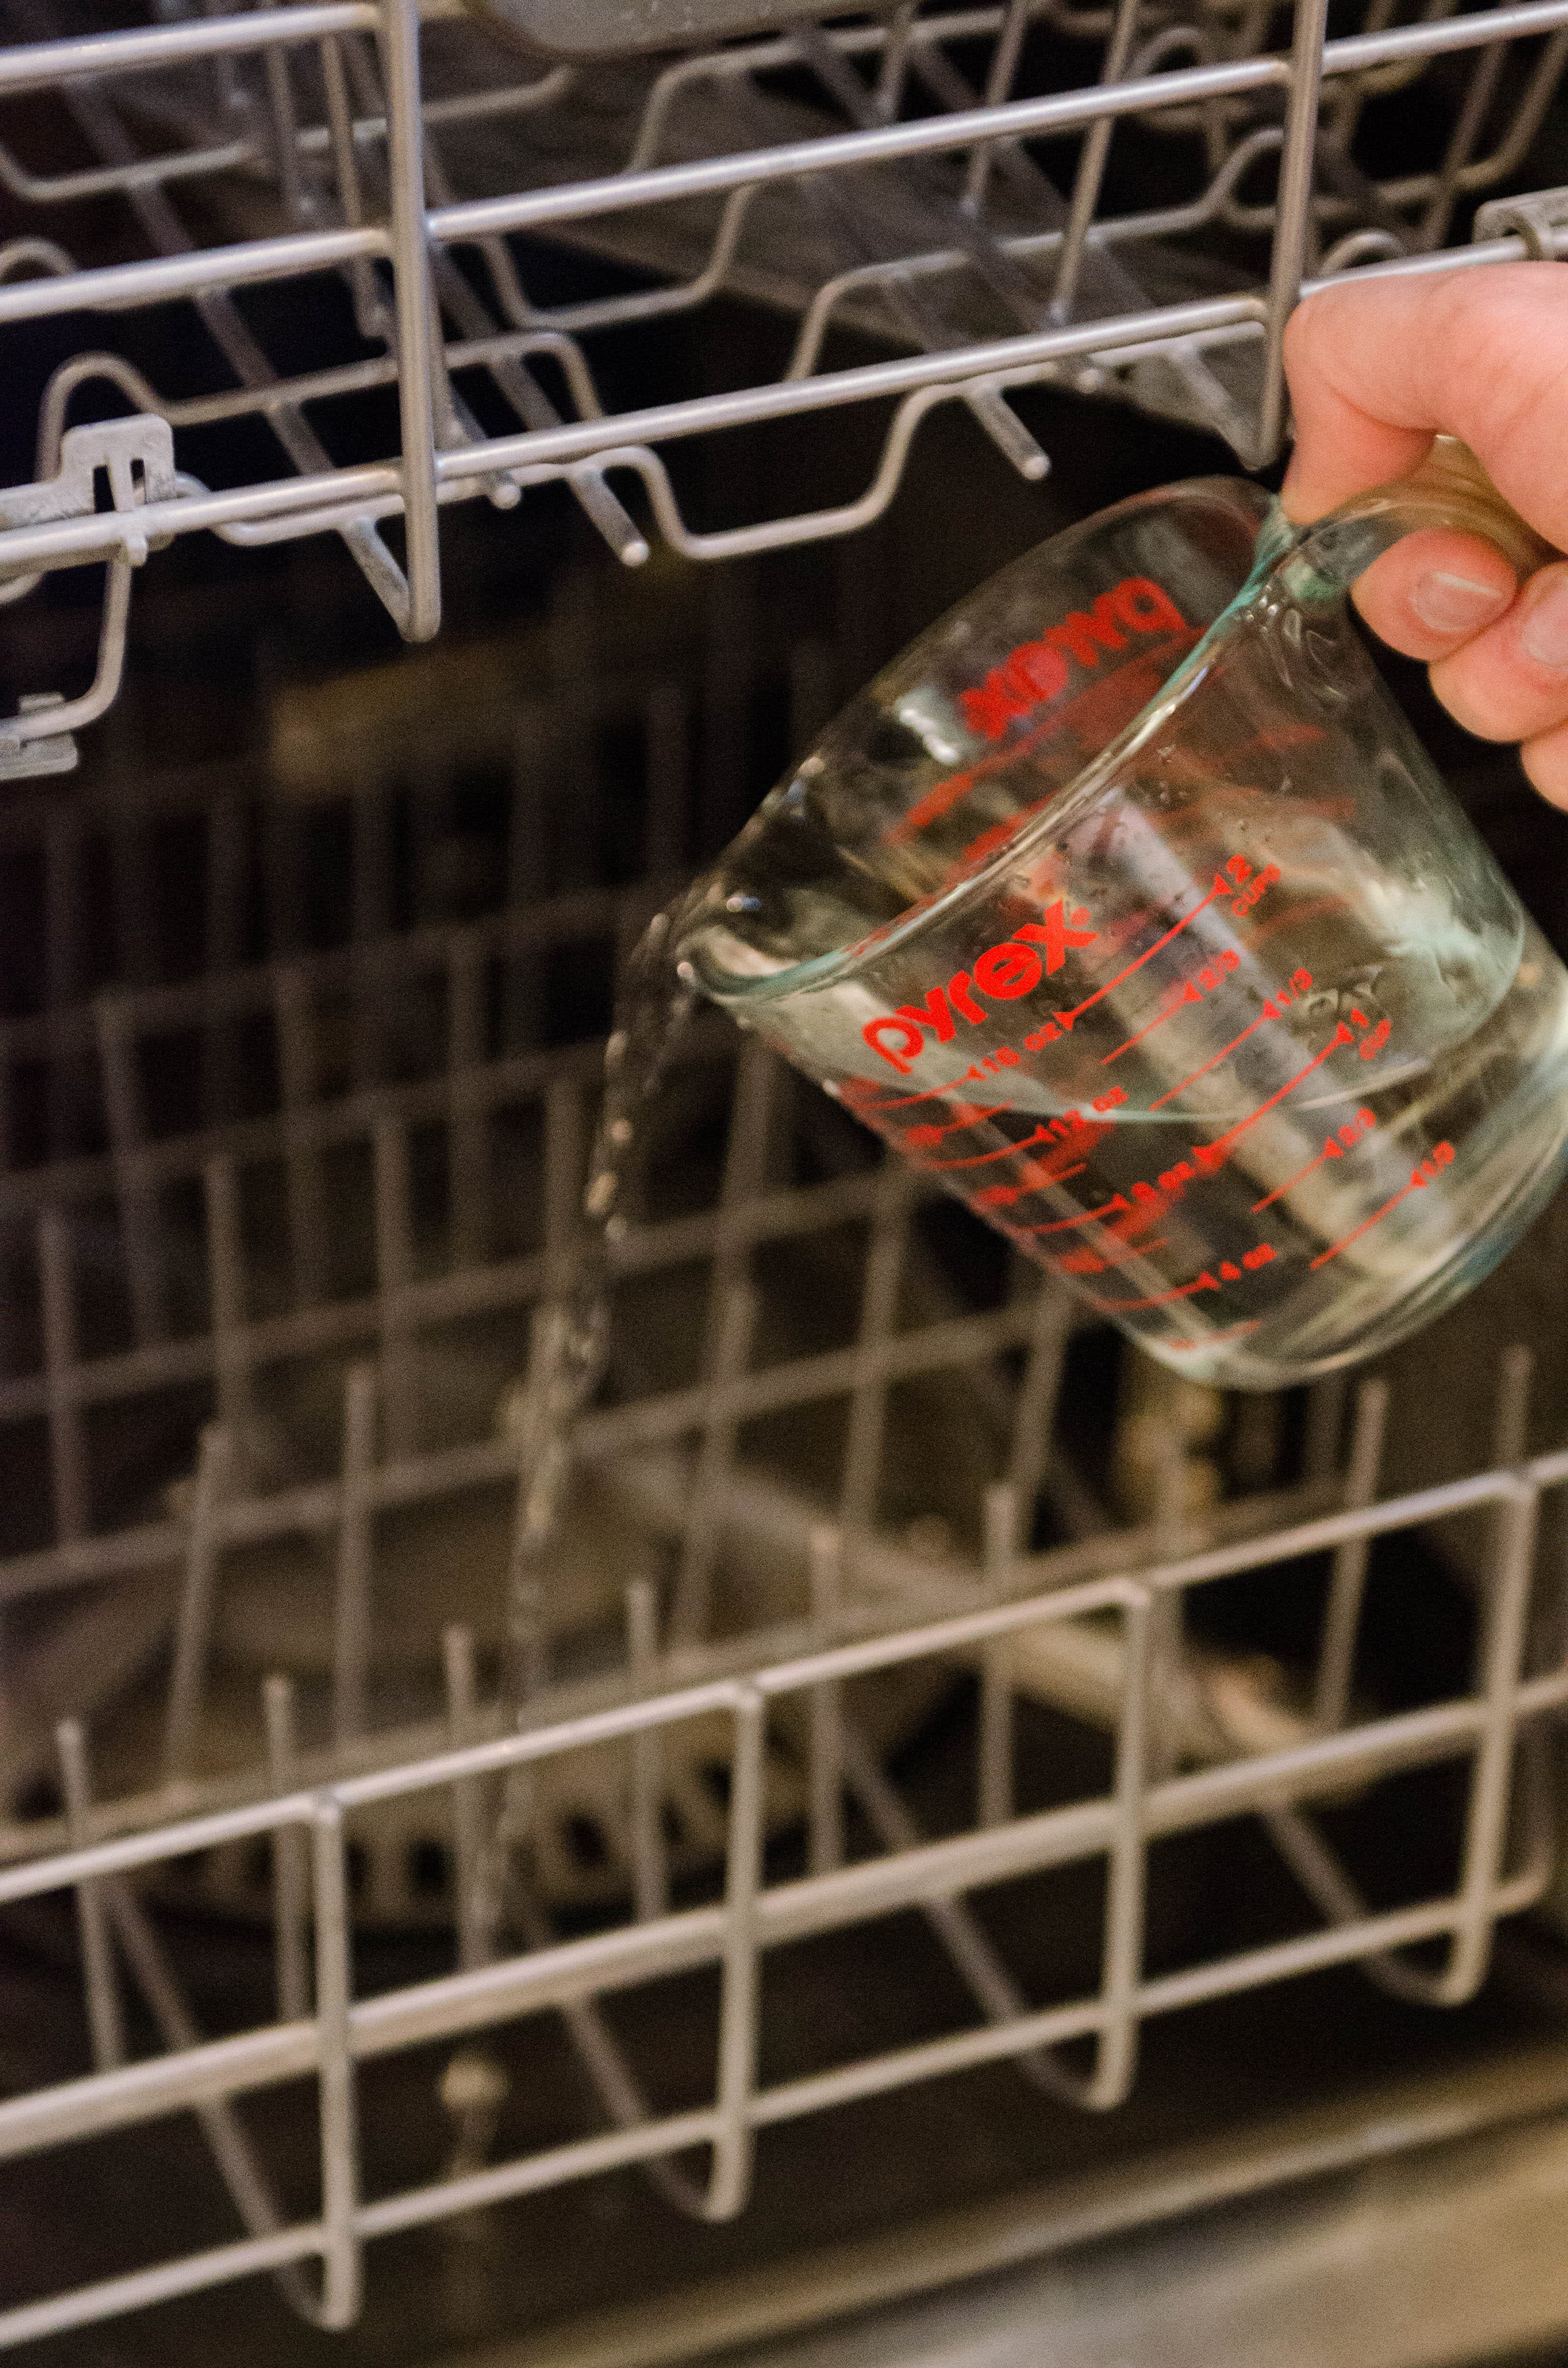 How to Make Old Dishwasher Perform Like New • Everyday Cheapskate